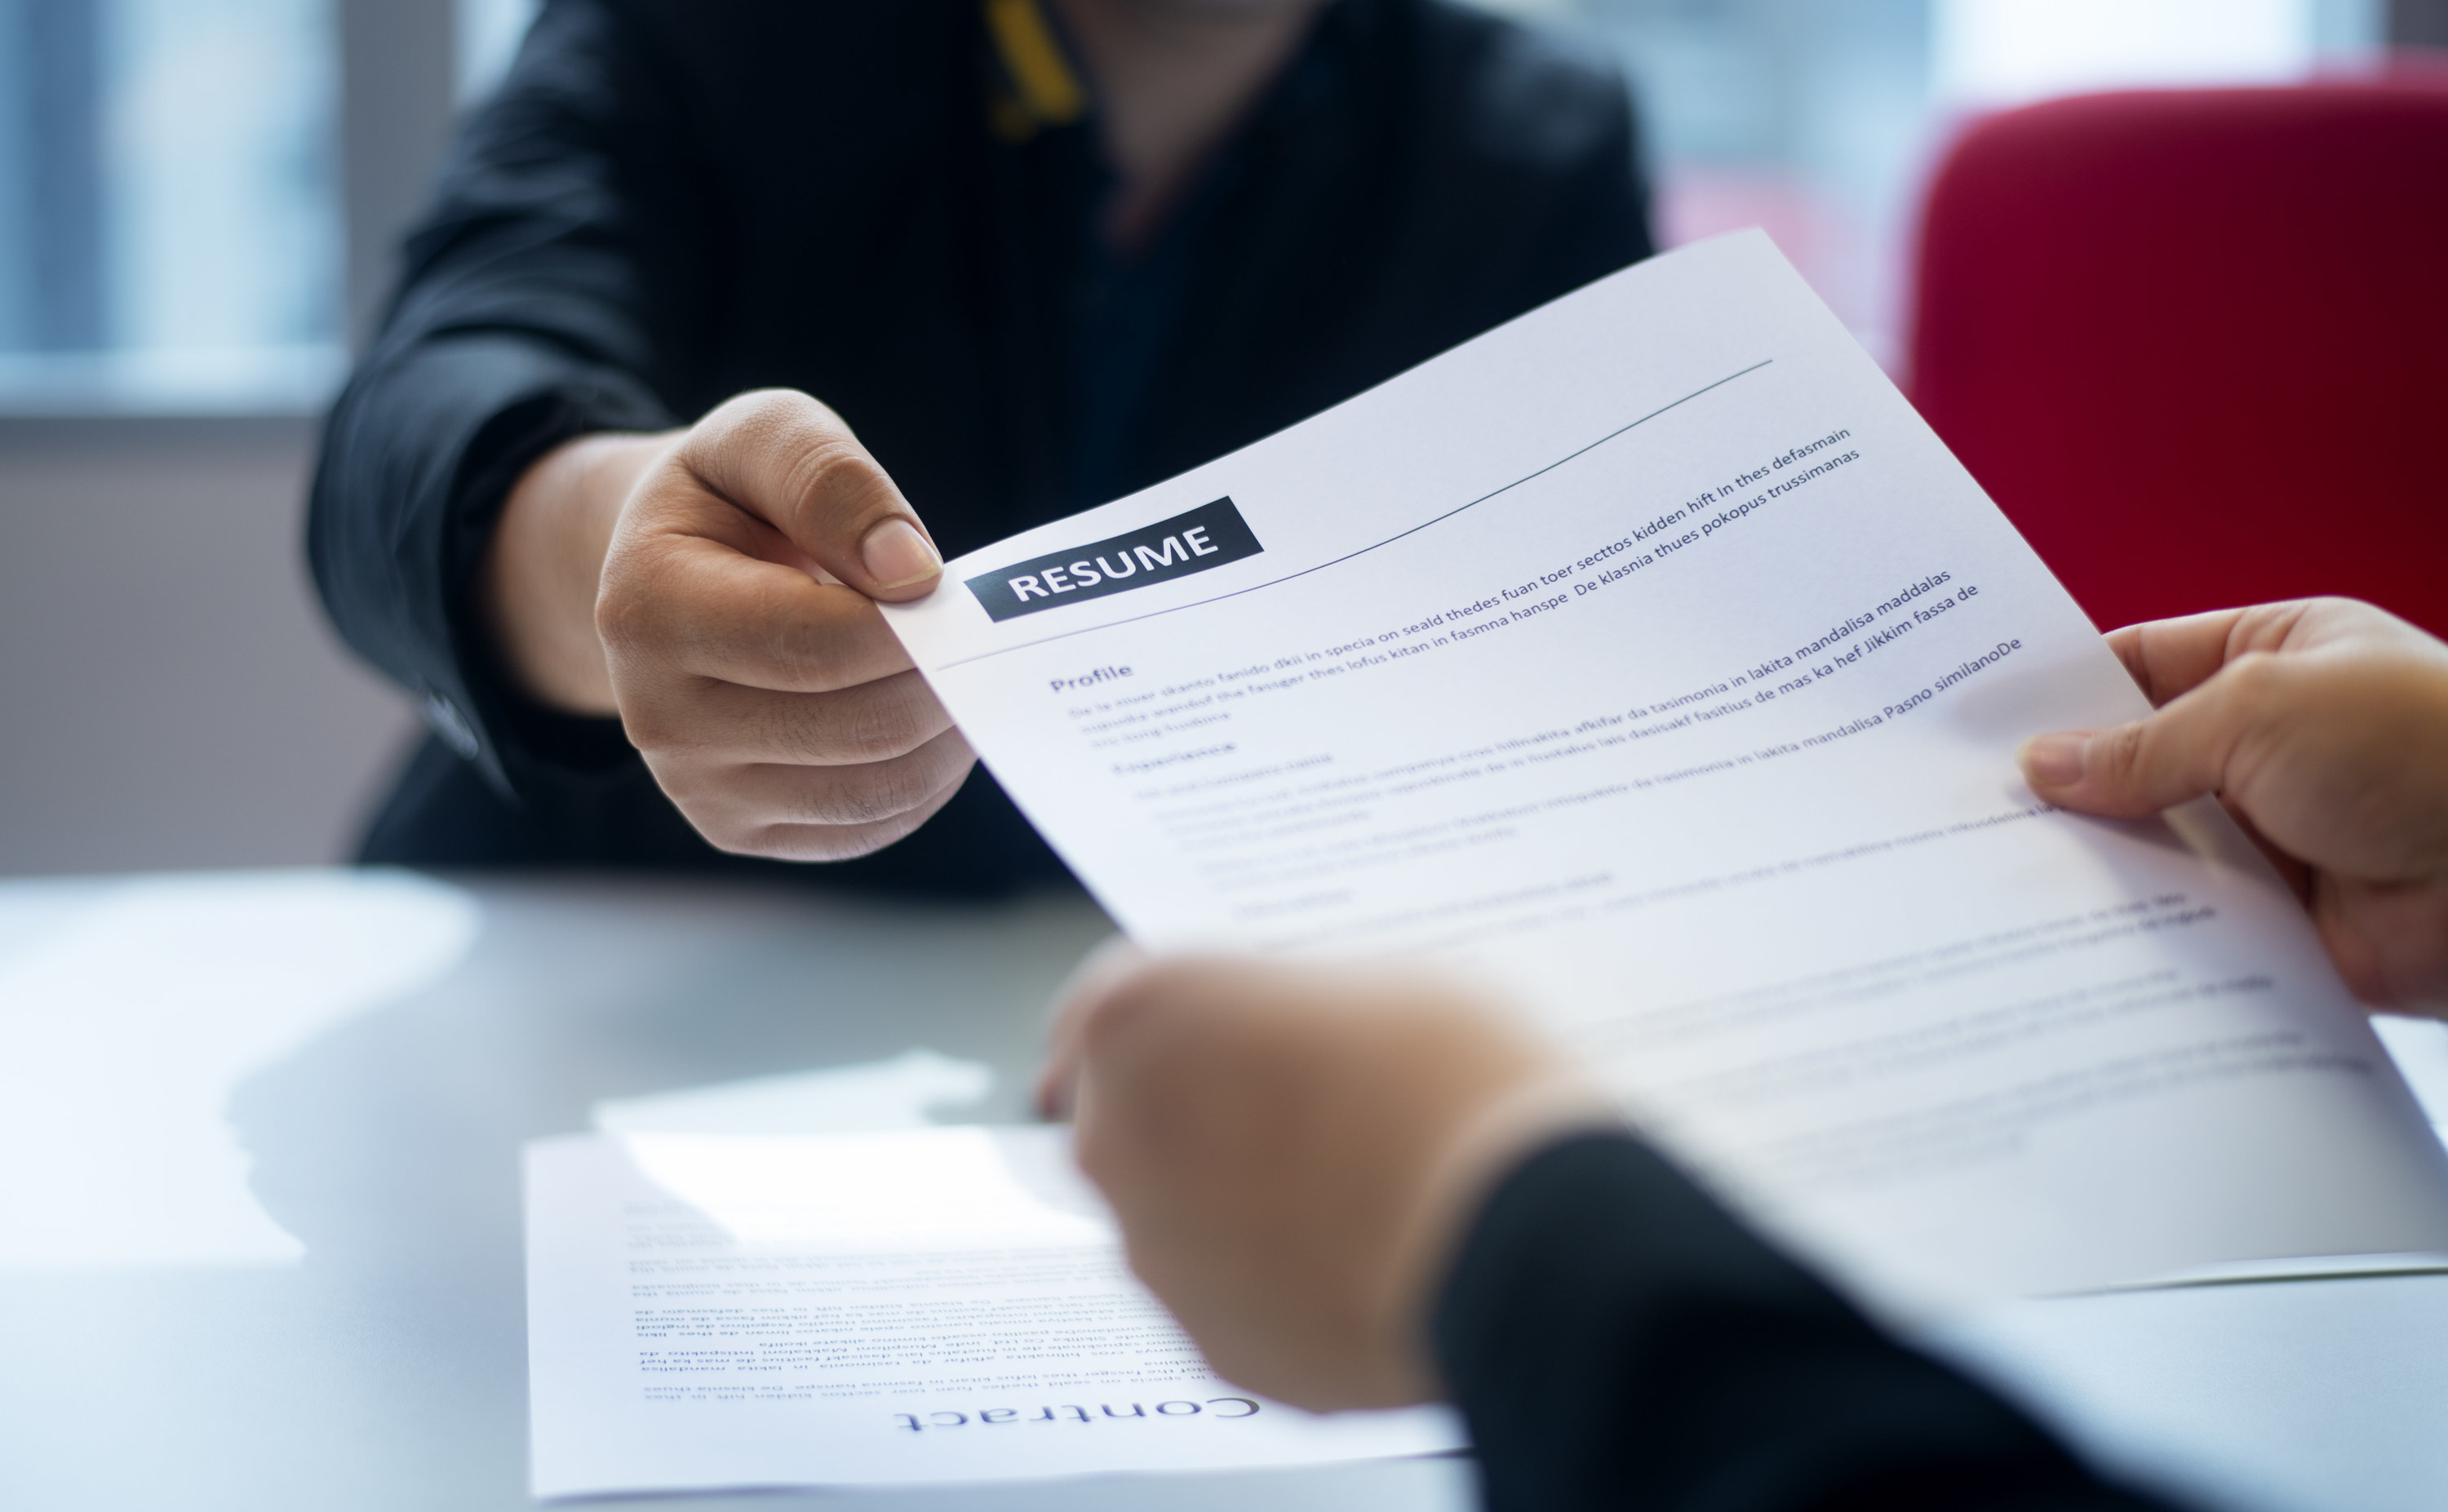 A person hands over a copy of their resume to a potential employer